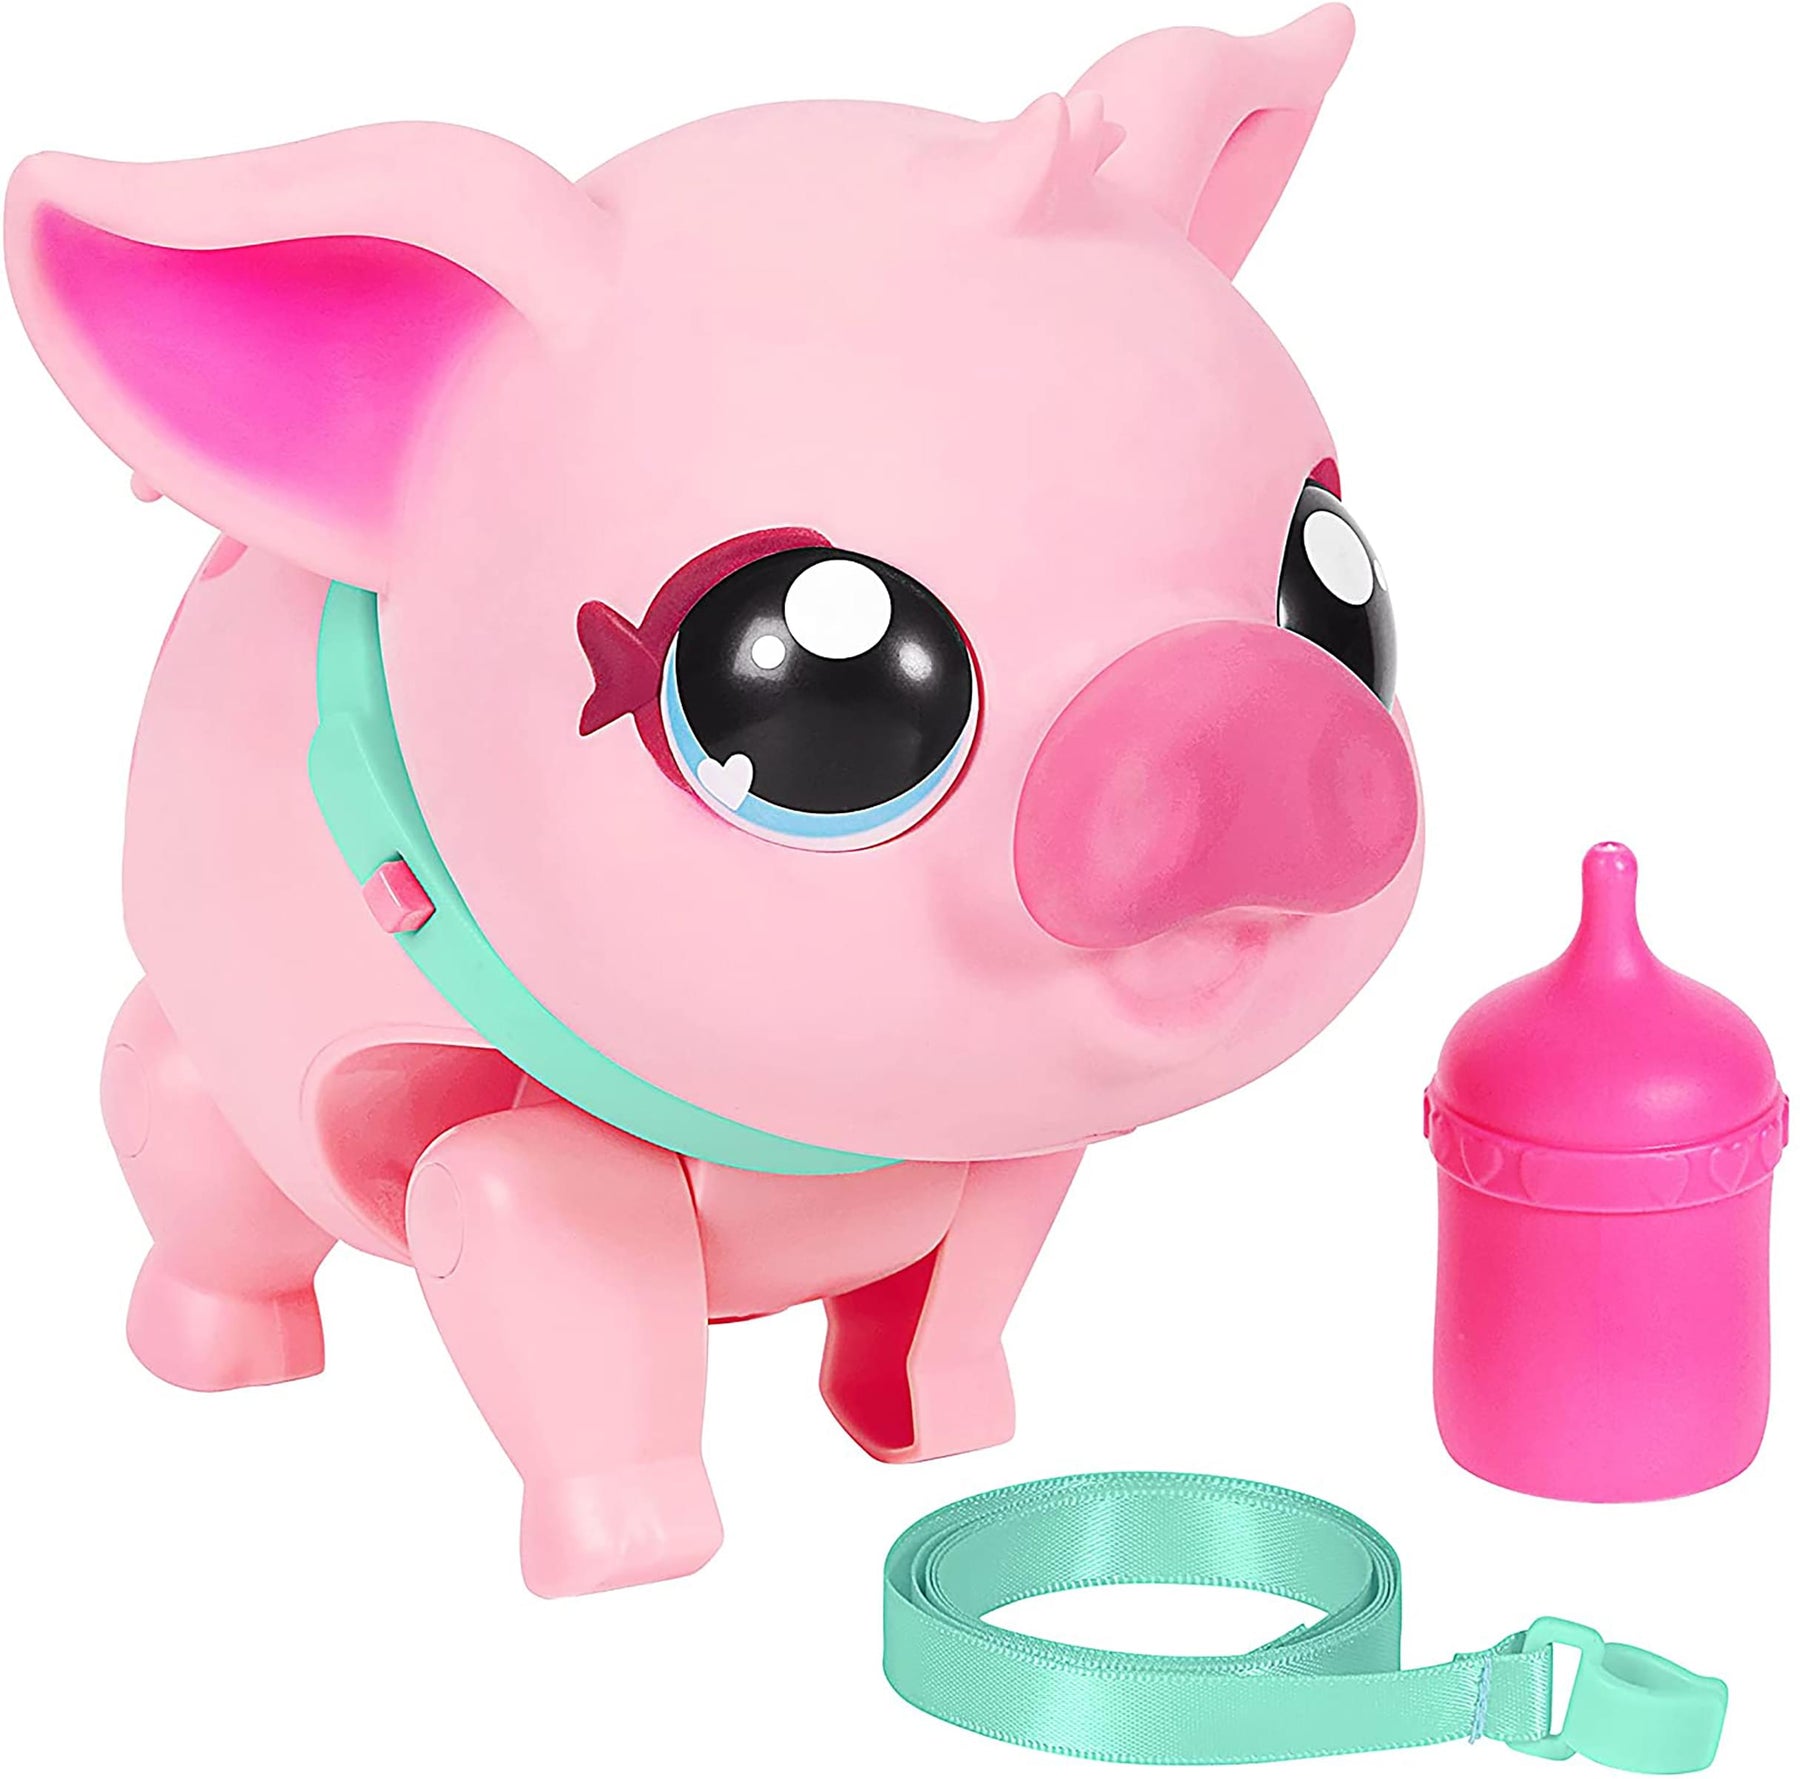 Little Live Pets Piggly Interactive Toy | 20+ Sounds & Reactions